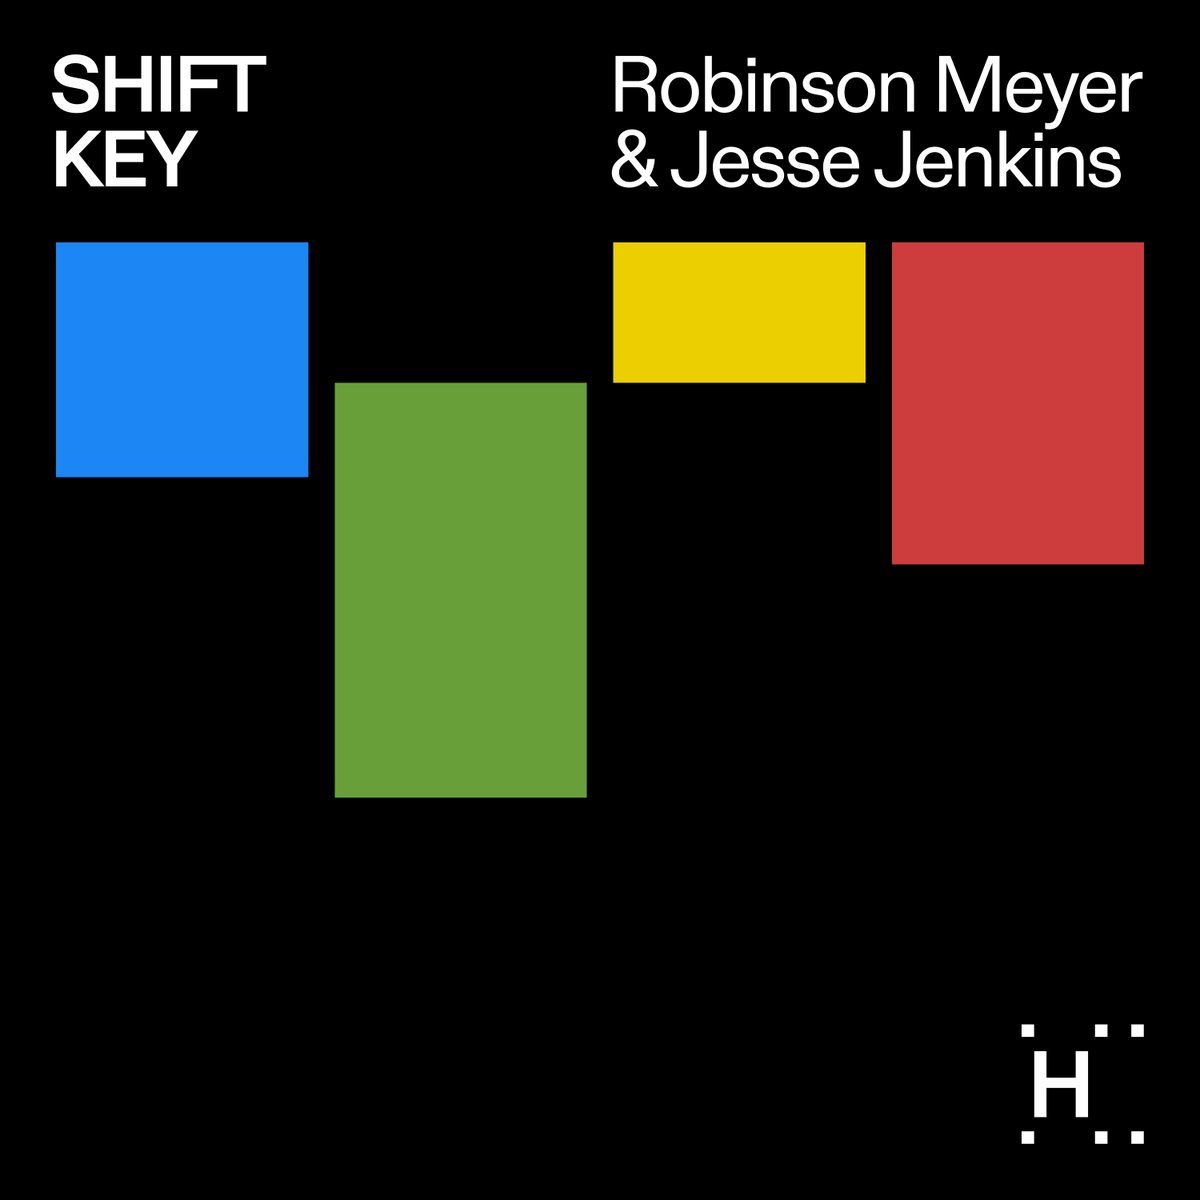 SHIFT KEY is a new podcast from @JesseJenkins and me. Each week, Jesse and I are going to talk about one big thing that we find fascinating from the world of climate and decarbonization. EVs, renewables, fossil fuels, you name it. Subscribe now on Apple Podcasts & Spotify.